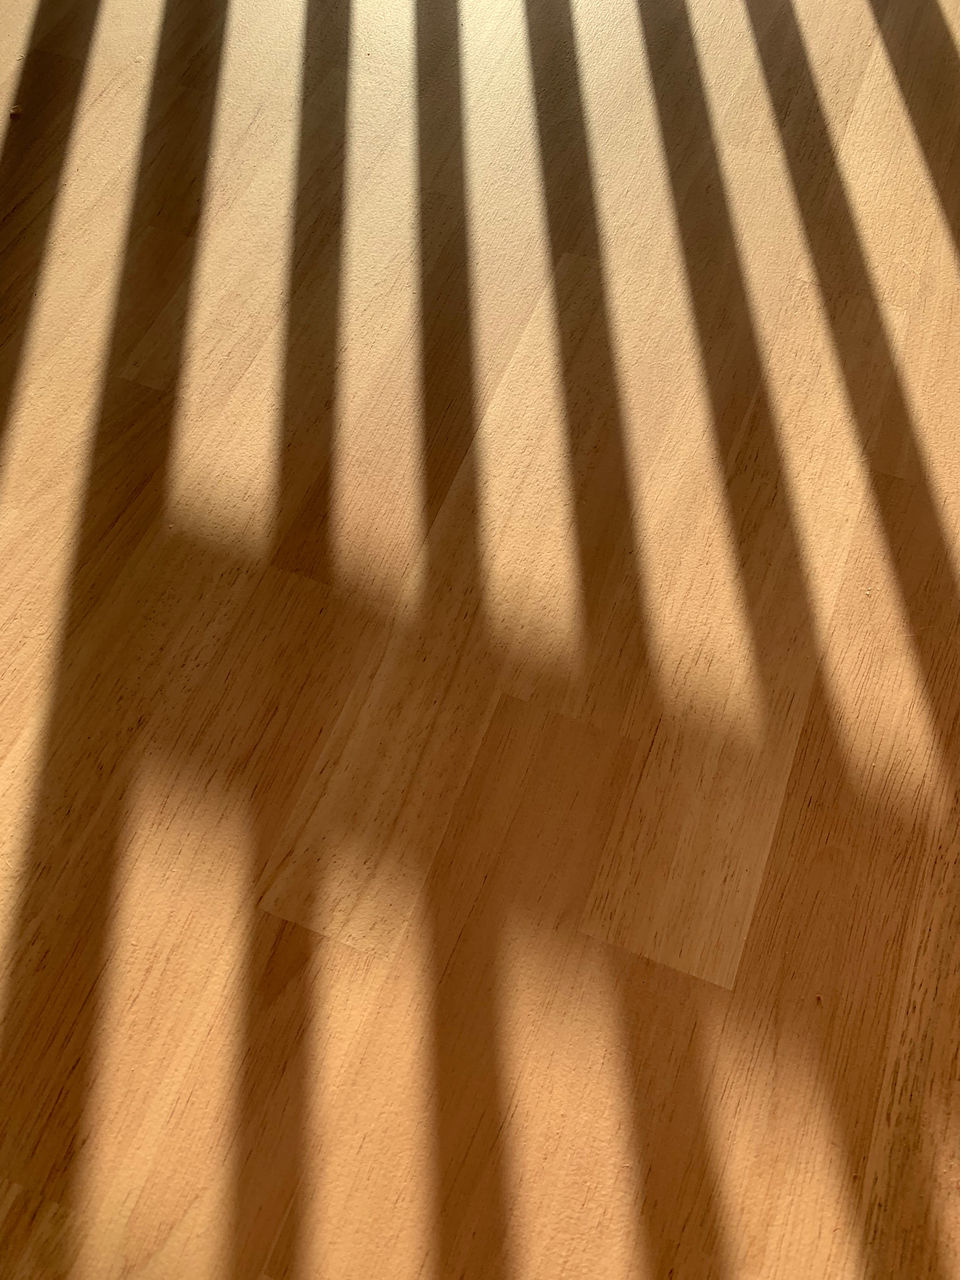 shadow, sunlight, wood, brown, pattern, floor, flooring, striped, backgrounds, no people, focus on shadow, full frame, nature, line, wood flooring, laminate flooring, day, hardwood, textured, close-up, high angle view, outdoors, abstract